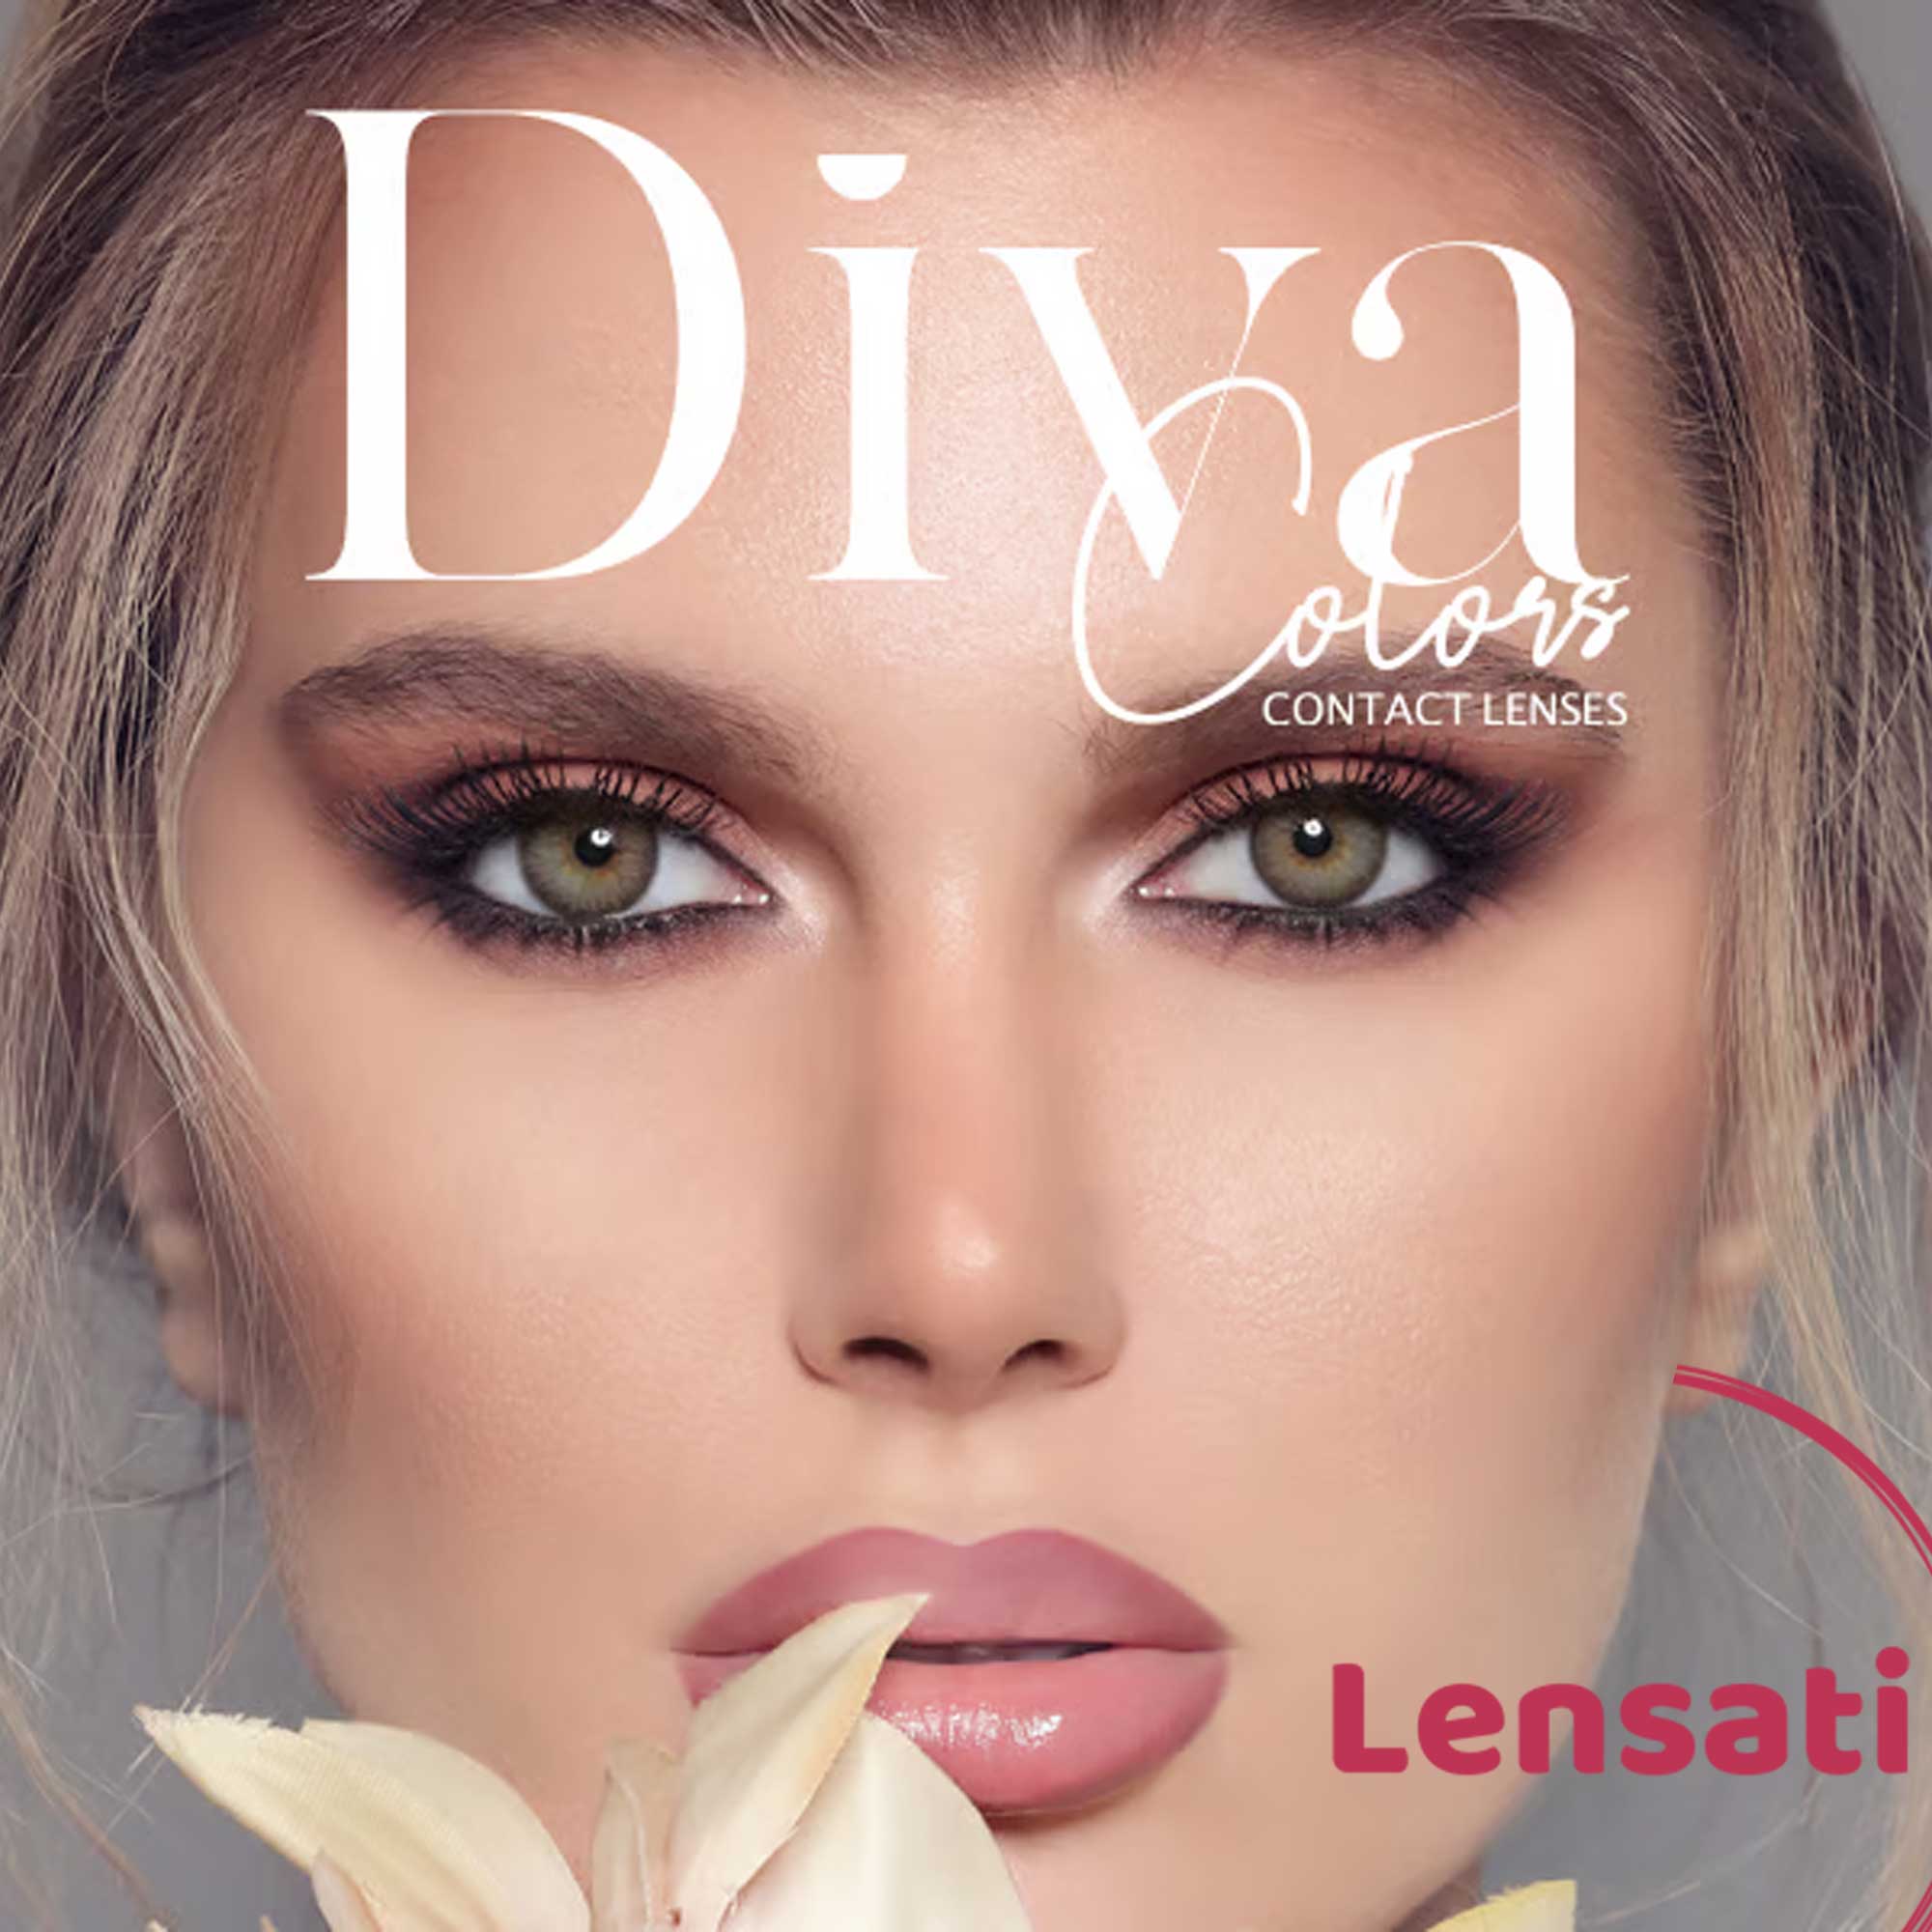 Diva Product Category